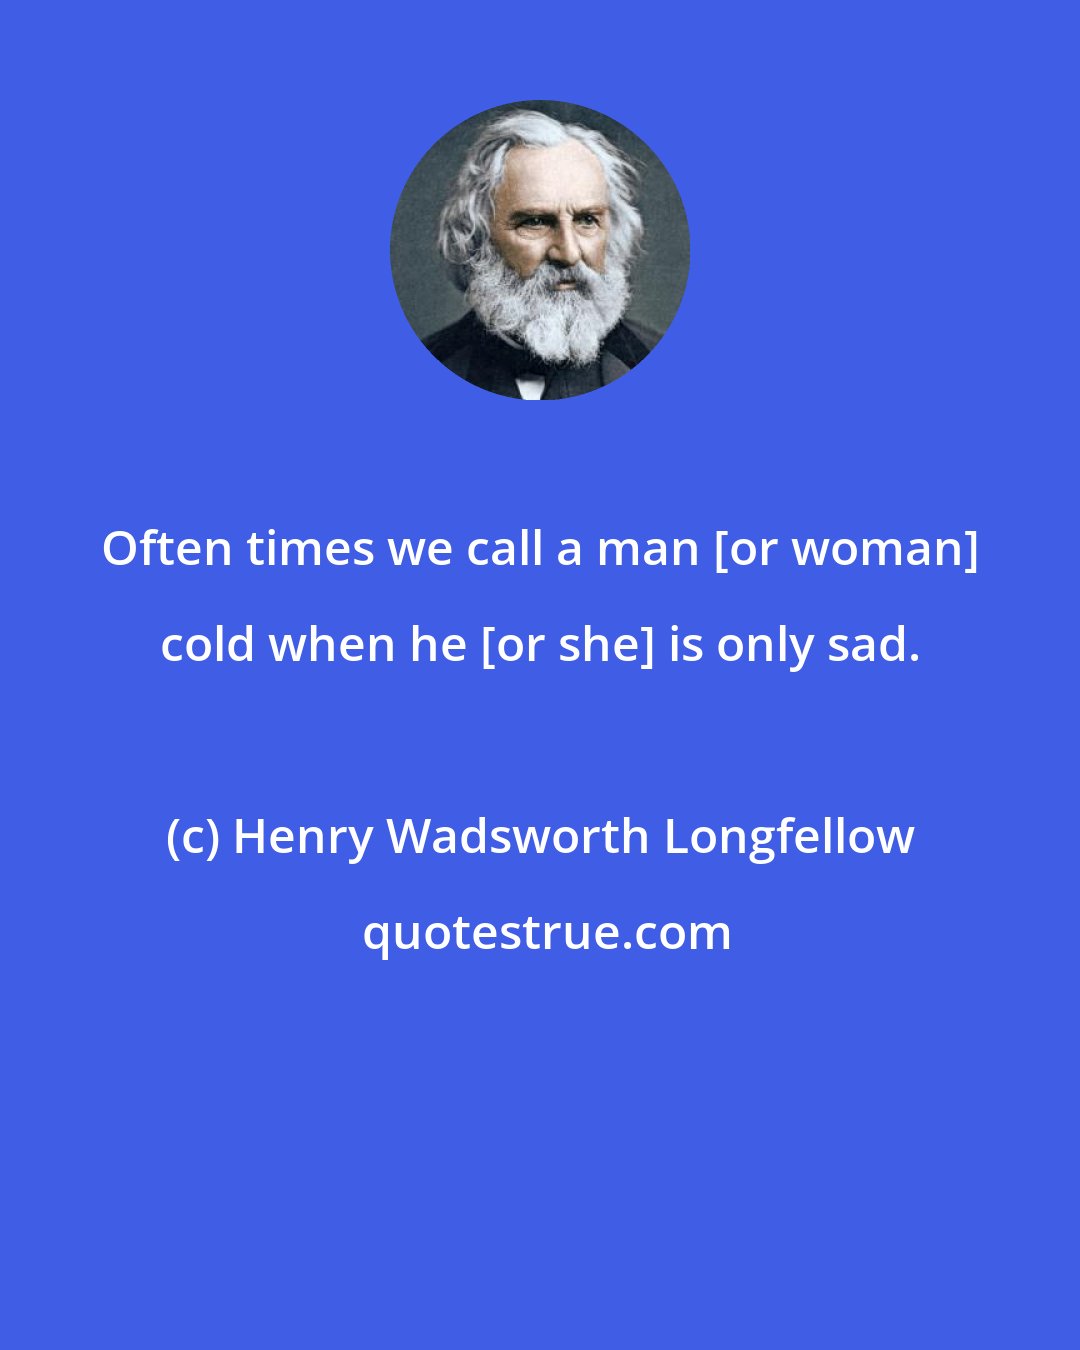 Henry Wadsworth Longfellow: Often times we call a man [or woman] cold when he [or she] is only sad.